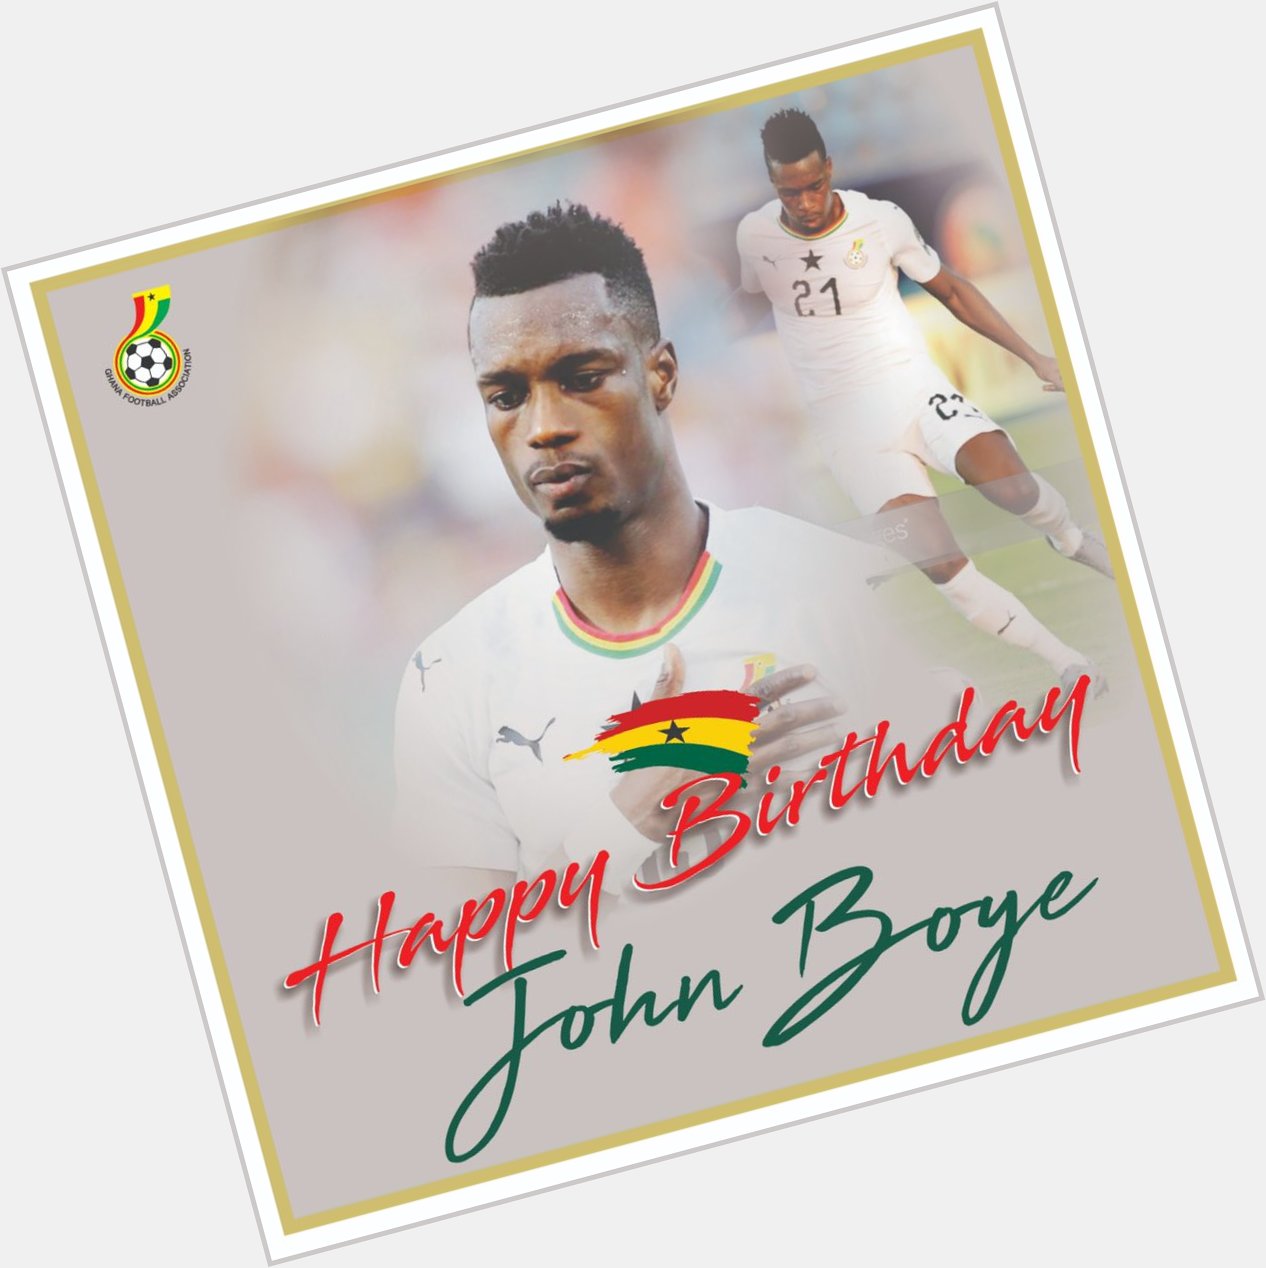 Happy Birthday wishes to Ghana & defender John Boye.

Live Healthy and Live Happy and Live Long    